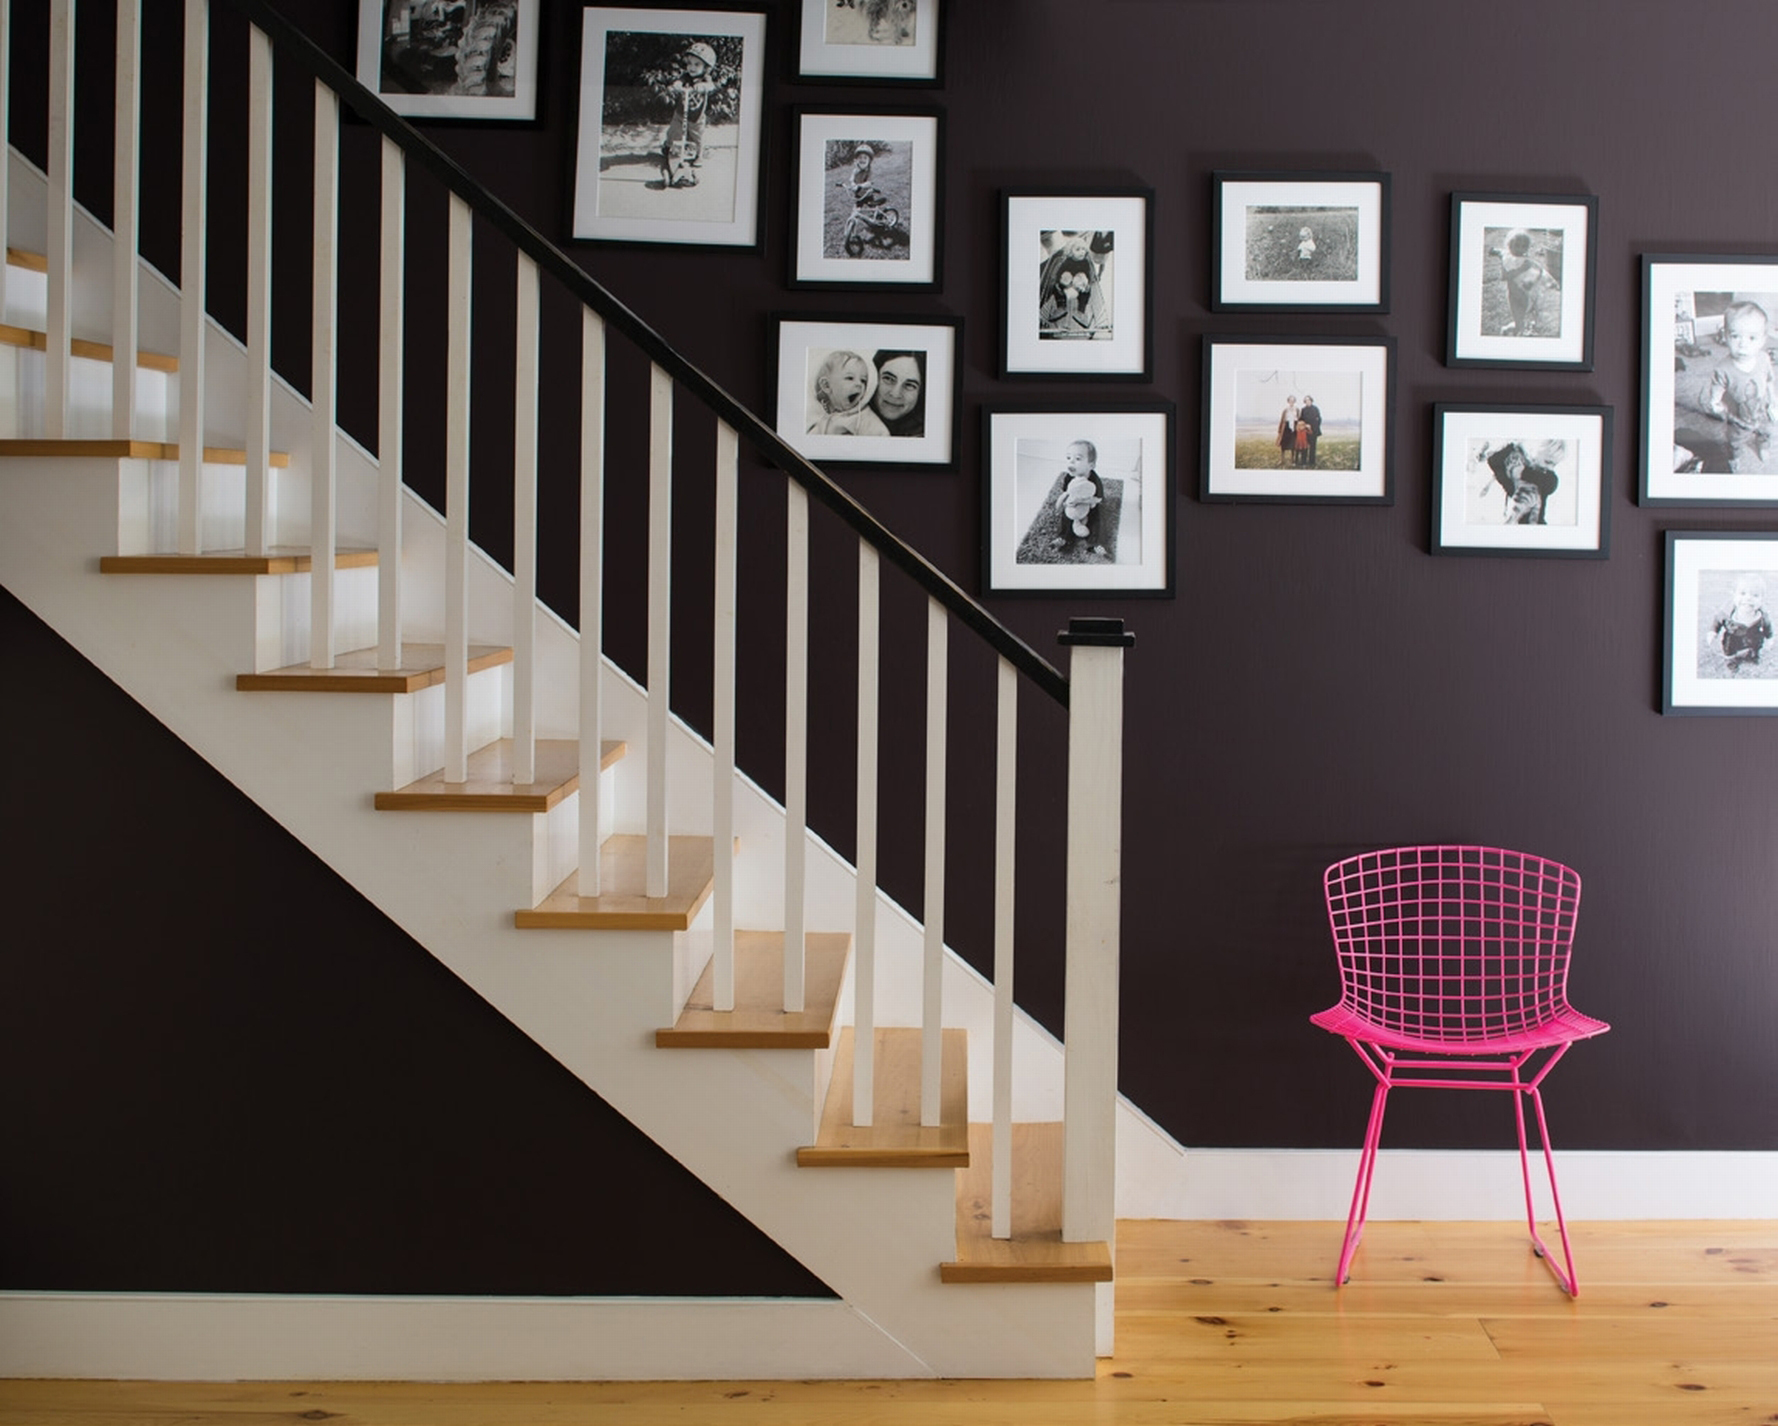 17 Excellent Staircase Ideas For Every Home Homebuilding